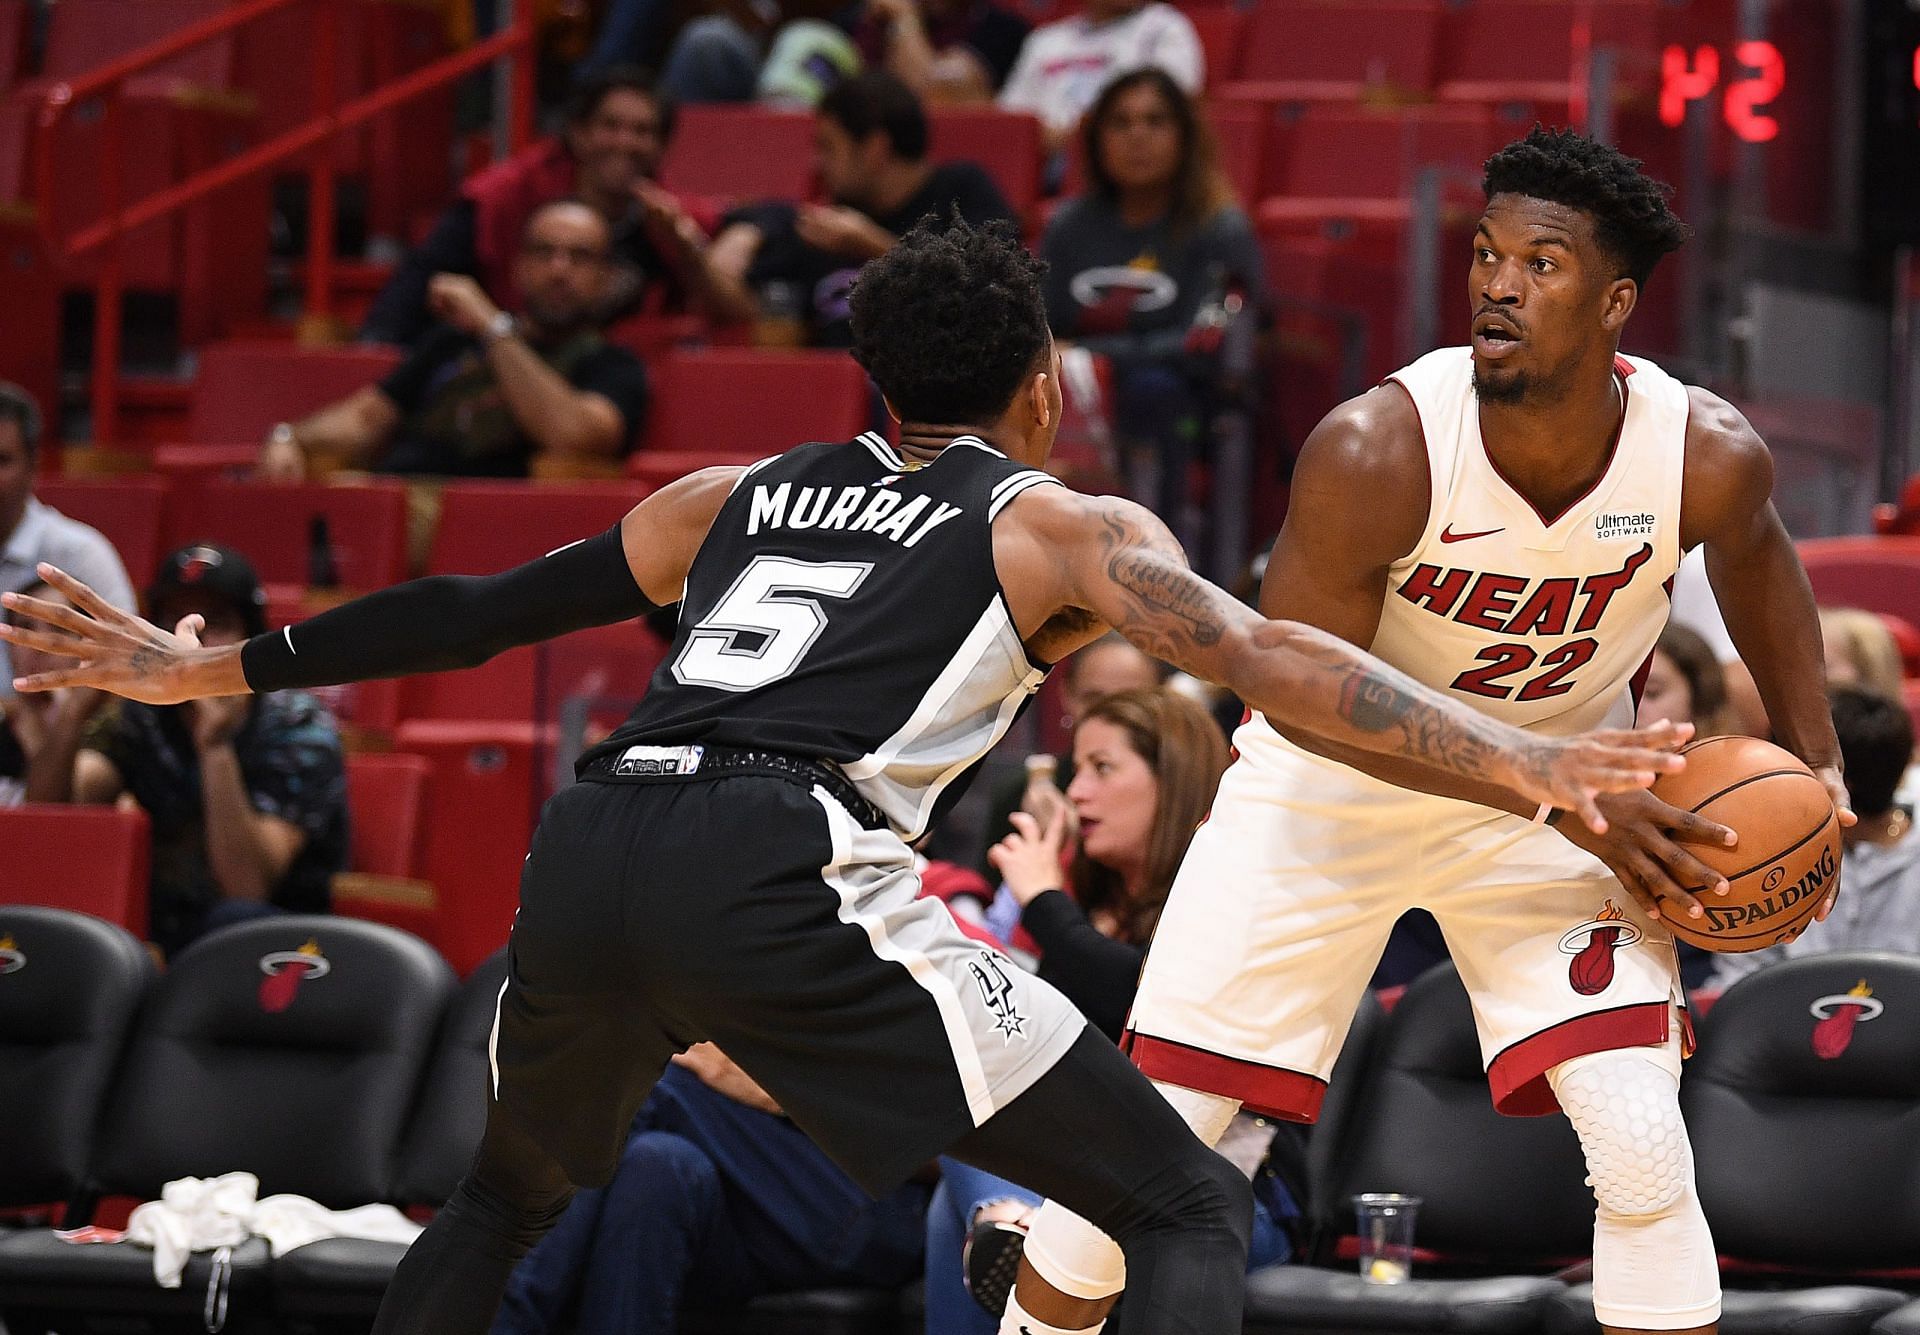 The visiting Miami Heat will face the San Antonio Spurs for the first time this season on Wednesday. [Photo: All U Can Heat]